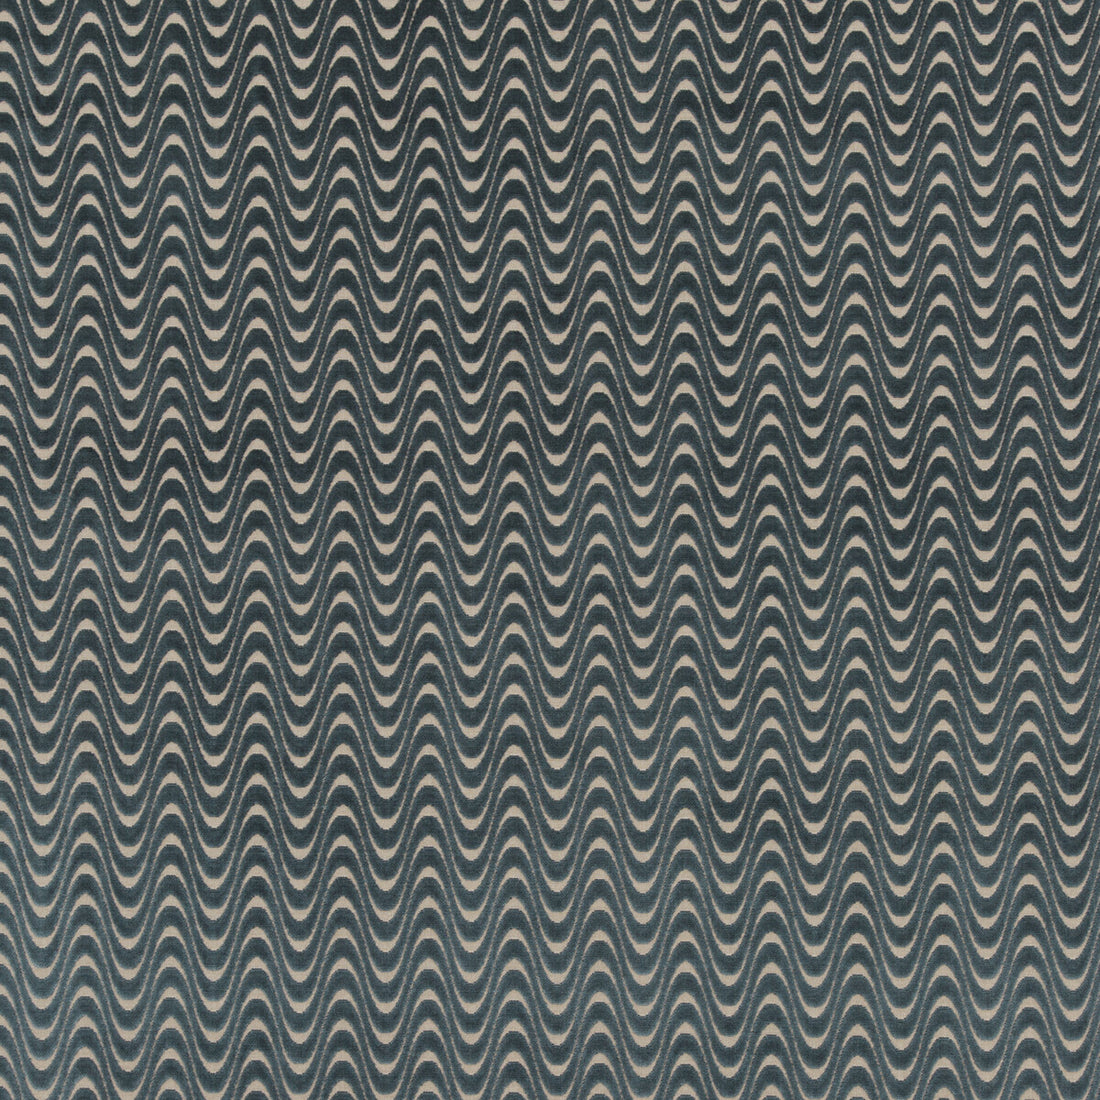 Jive fabric in indigo color - pattern PF50421.680.0 - by Baker Lifestyle in the Carnival collection